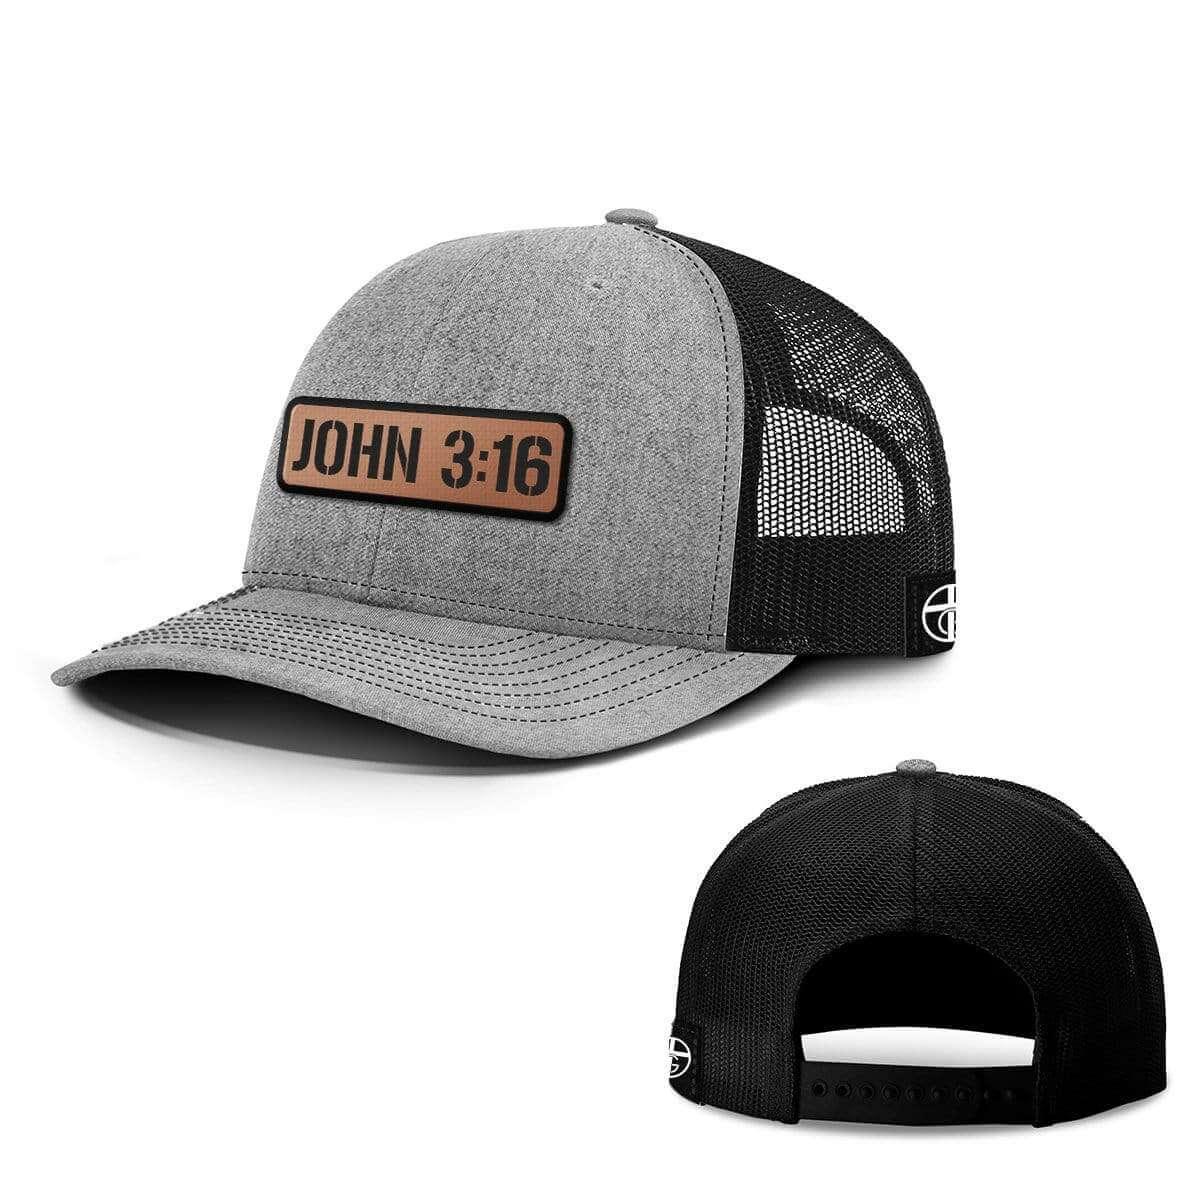 John 3:16 Leather Patch Hats